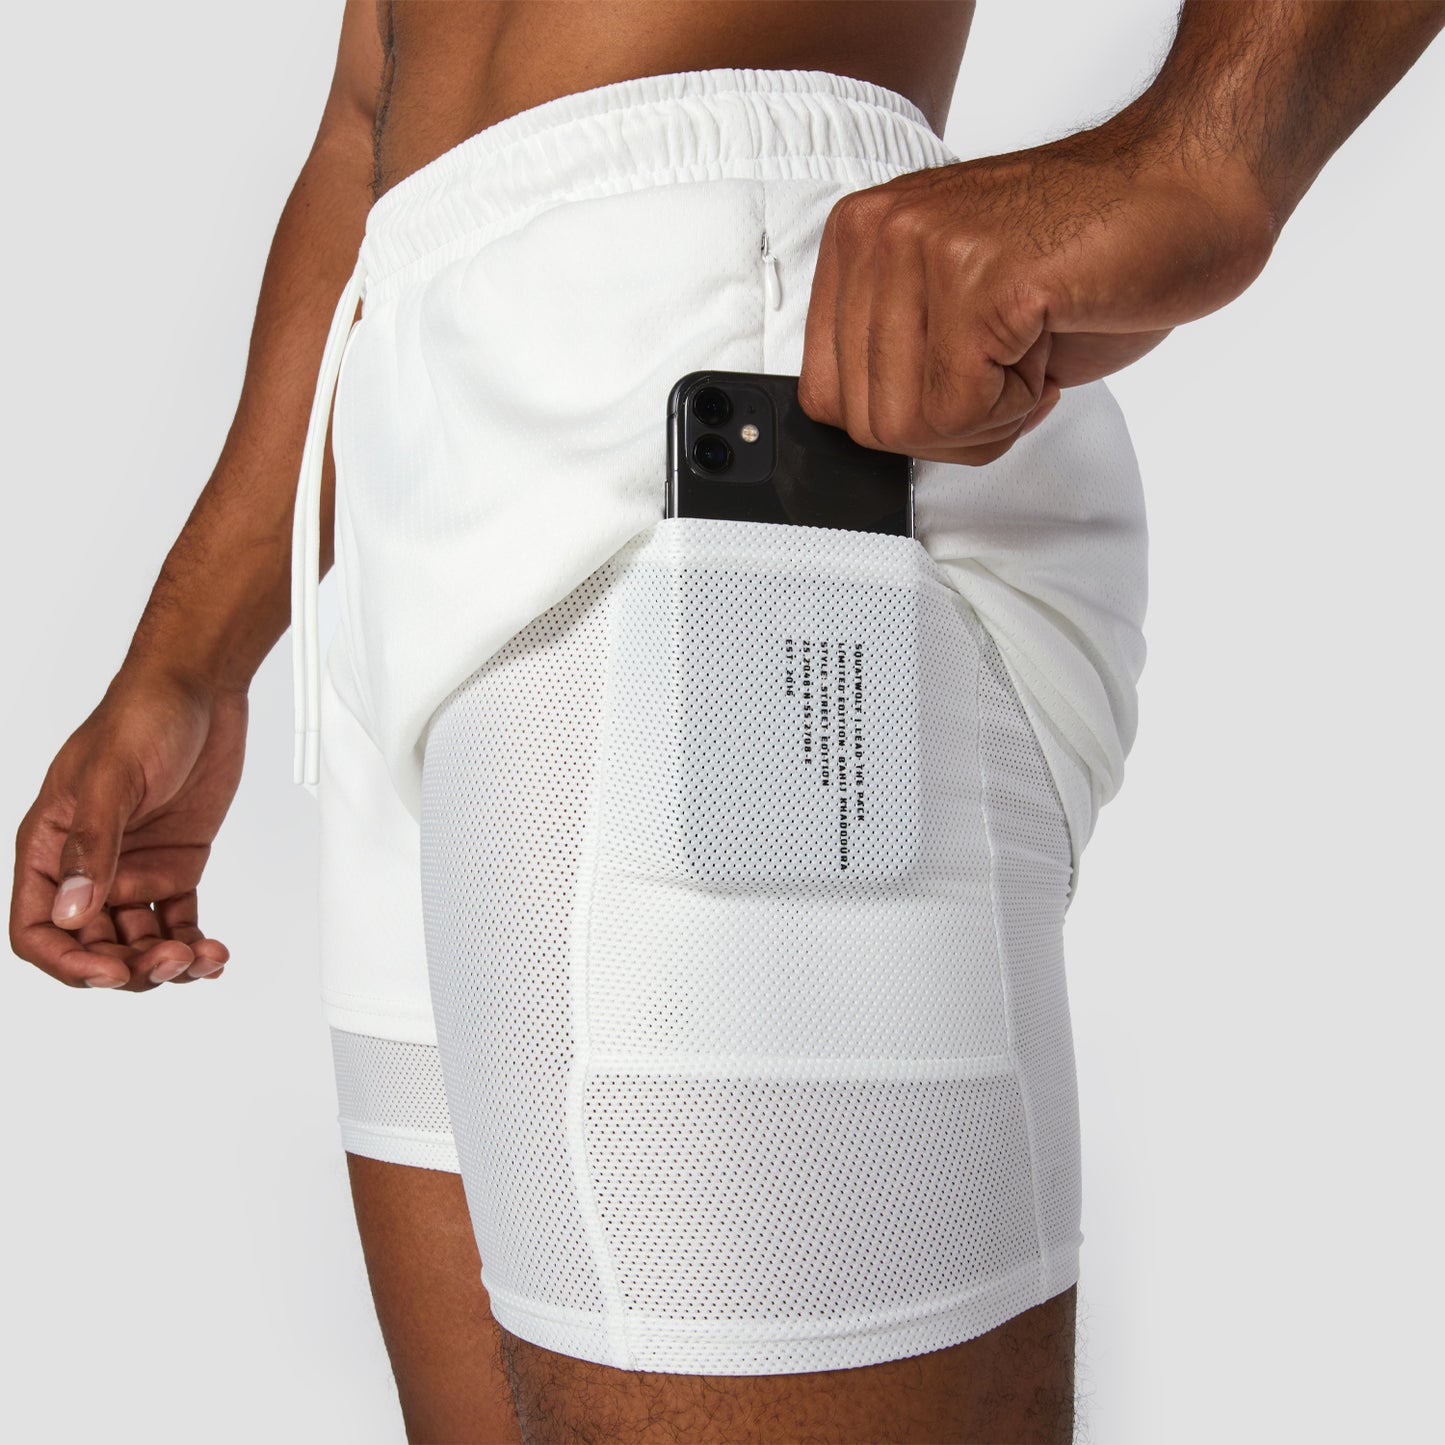 squatwolf-gym-wear-hybrid-performance-2-in-1-shorts-white-workout-shorts-for-men